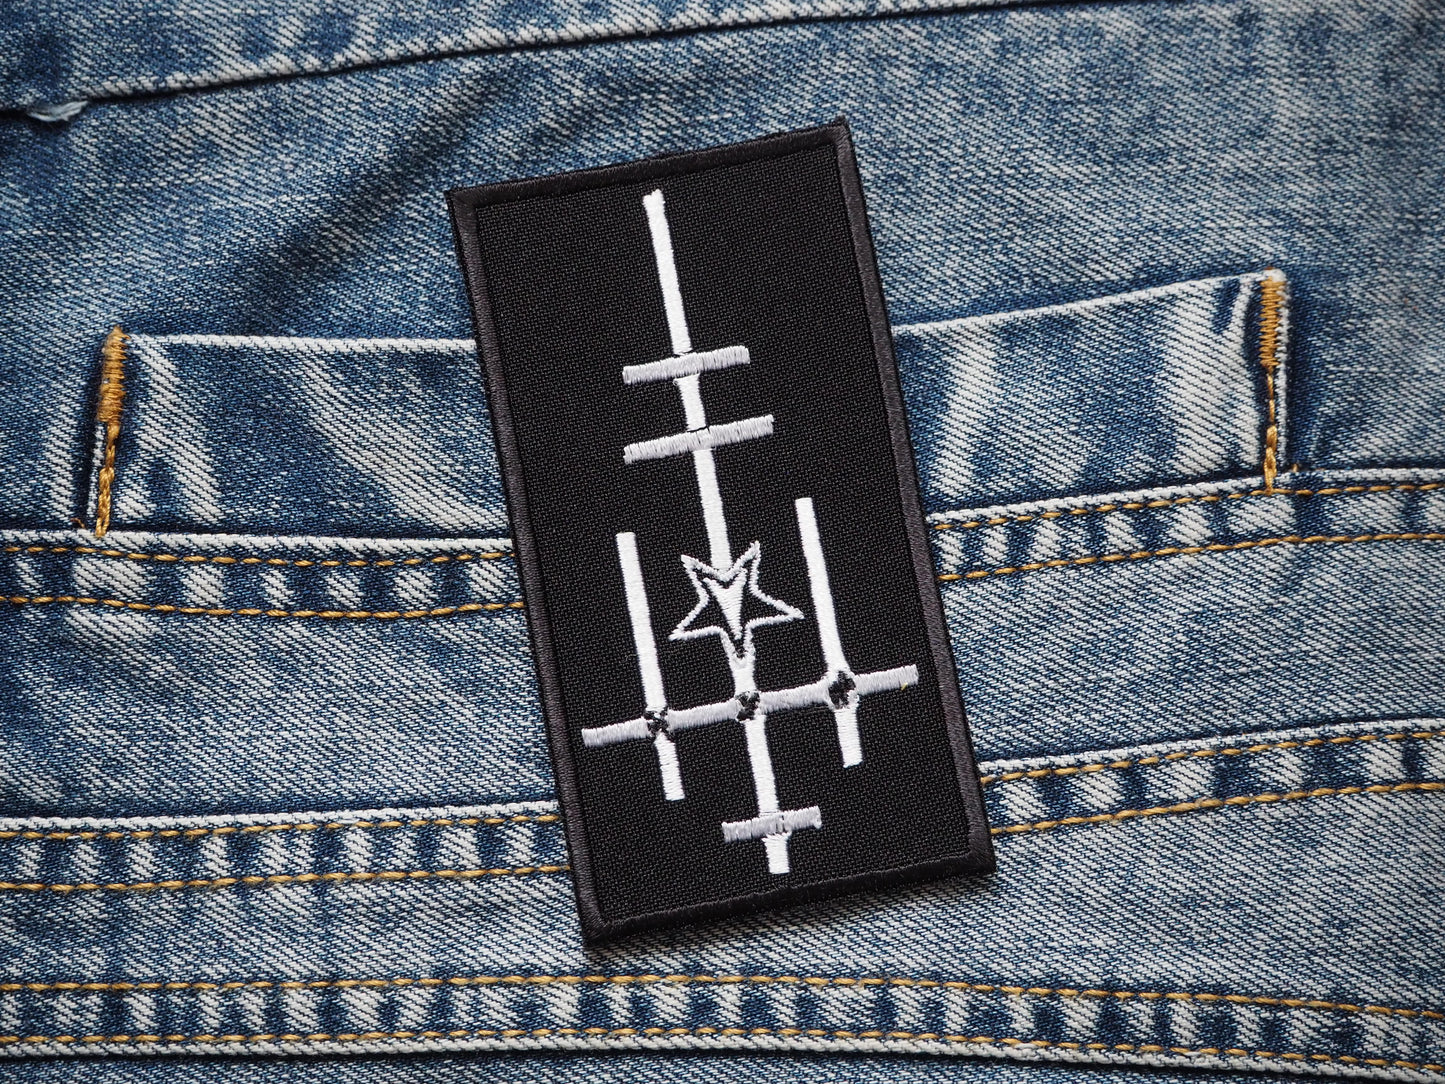 Les Légions Noires Inverted Cross Black Metal Embroidered Patch